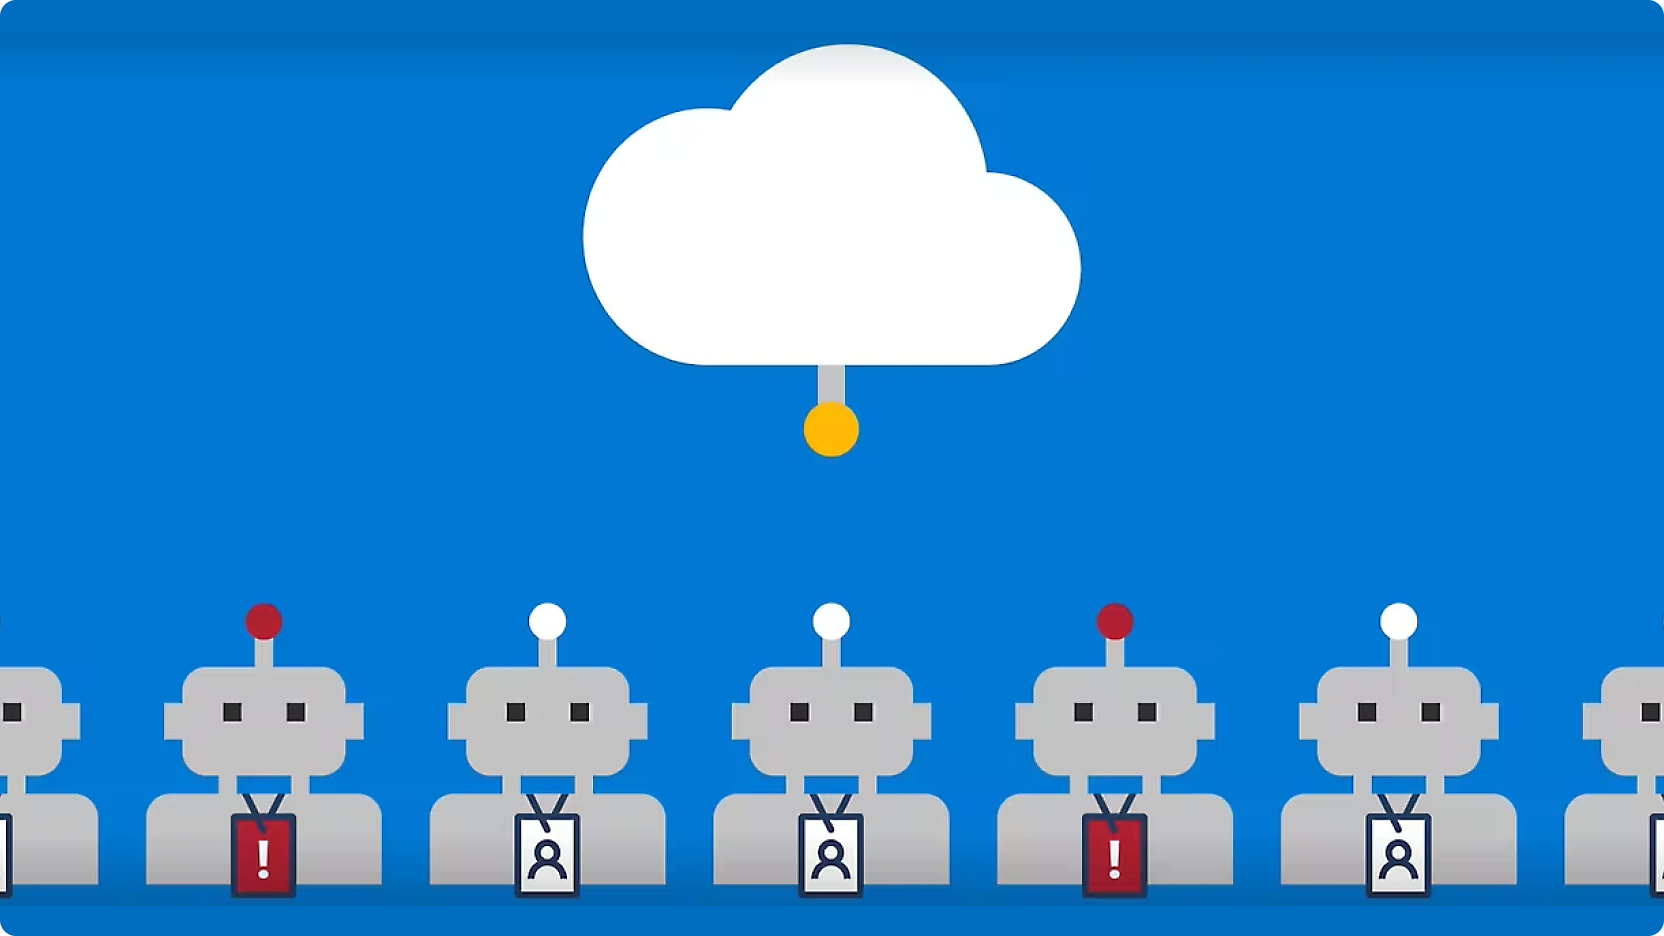 Graphic depicting rows of robots with red buttons on their heads, connected by lines to a central cloud